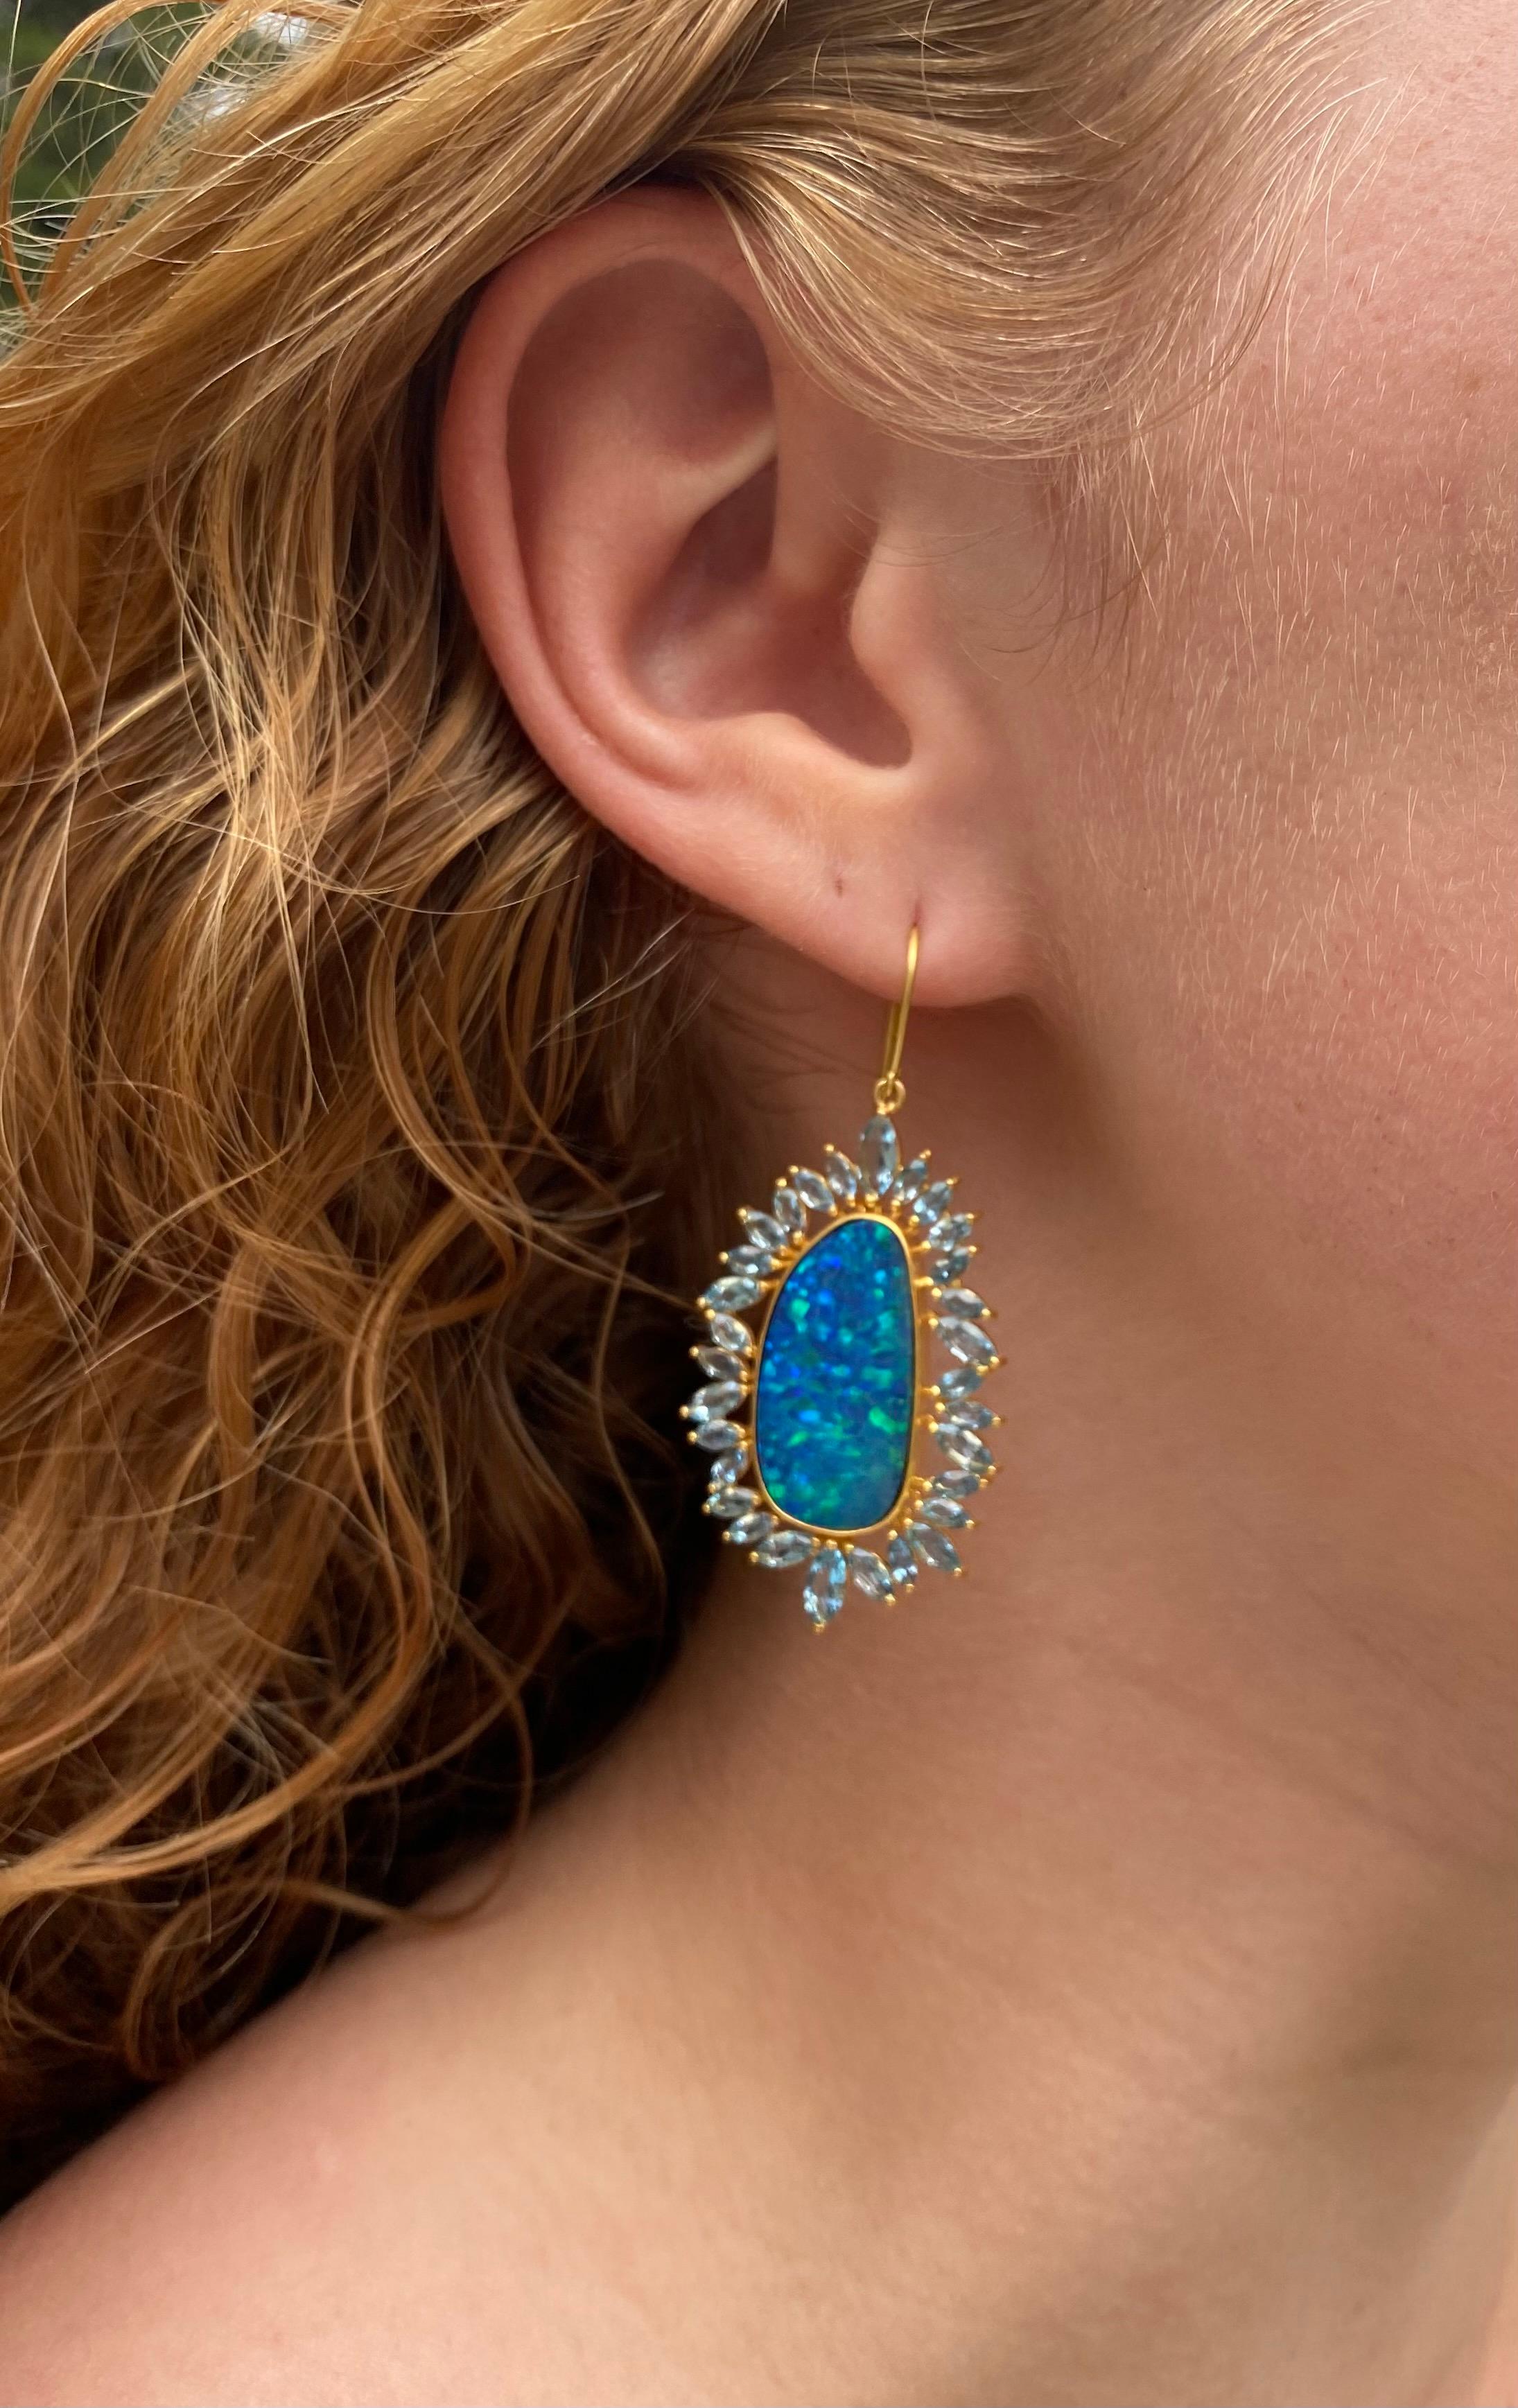 Designed by award winning jewelry designer Lauren Harper, these Boulder Opal and Aquamarine Earrings are a stunning new addition to the collection.  Made by hand in 18kt Gold in a matte finish. Lightweight enough for all day wear. Ships in beautiful